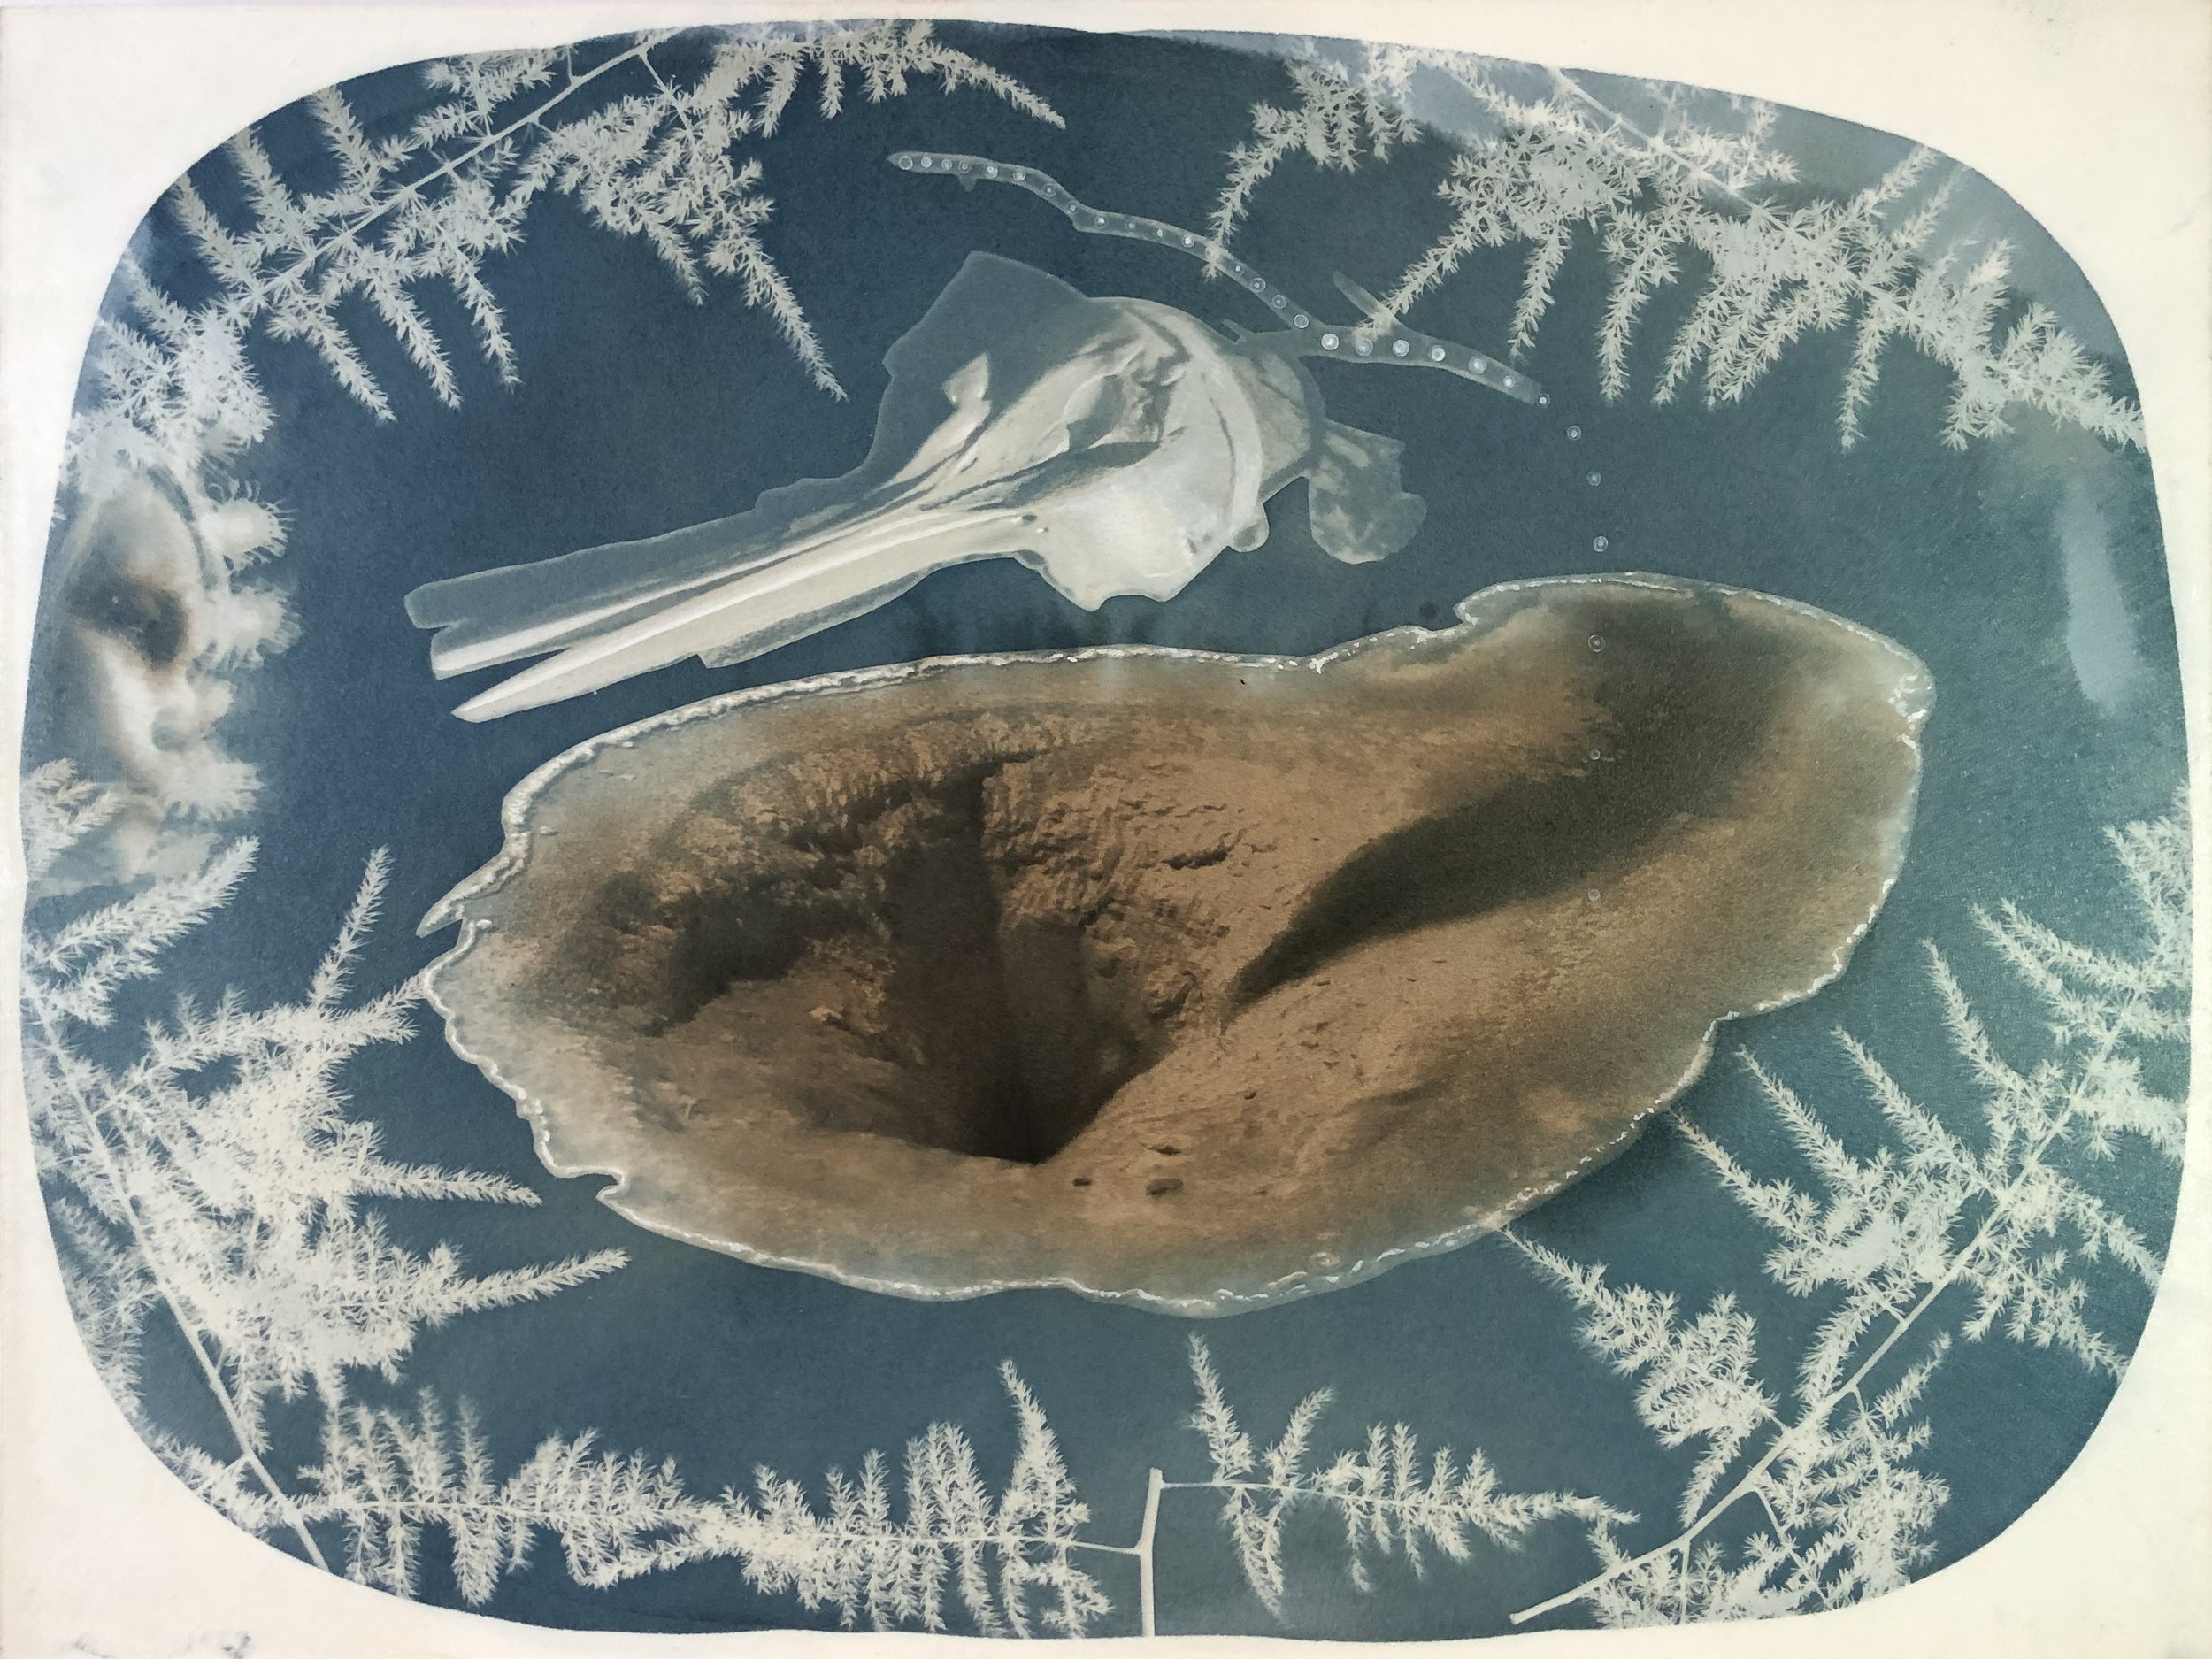  Annalise Neil "Yellowstone National Park/Bahia de los Angeles/Olympic..." / 2020 /Watercolor paint on bleached and wine-tannin toned cyanotype, mounted on wood panel / 9"H x 11"W x 1"D / $350 